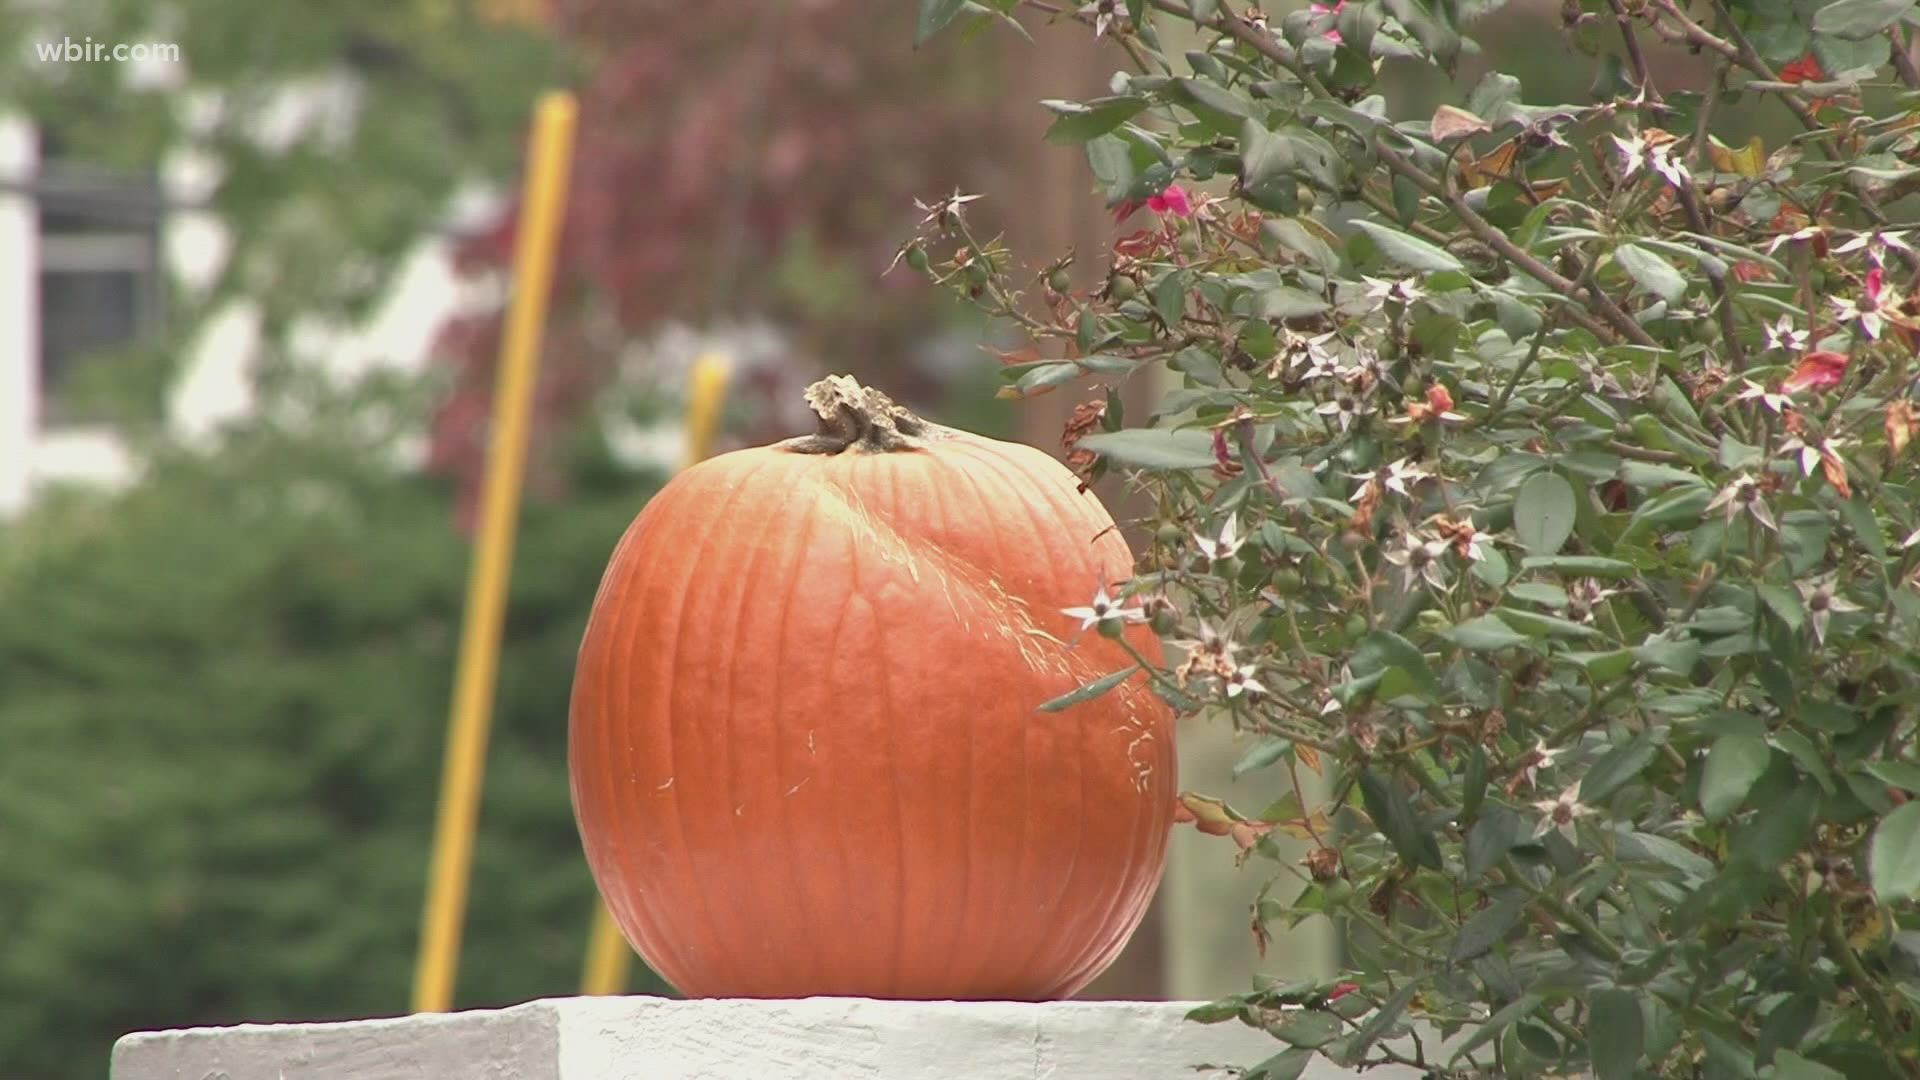 During October, people on Tennessee's sex offender registry cannot put up Halloween decorations, attend Halloween functions or distribute candy on Halloween night.